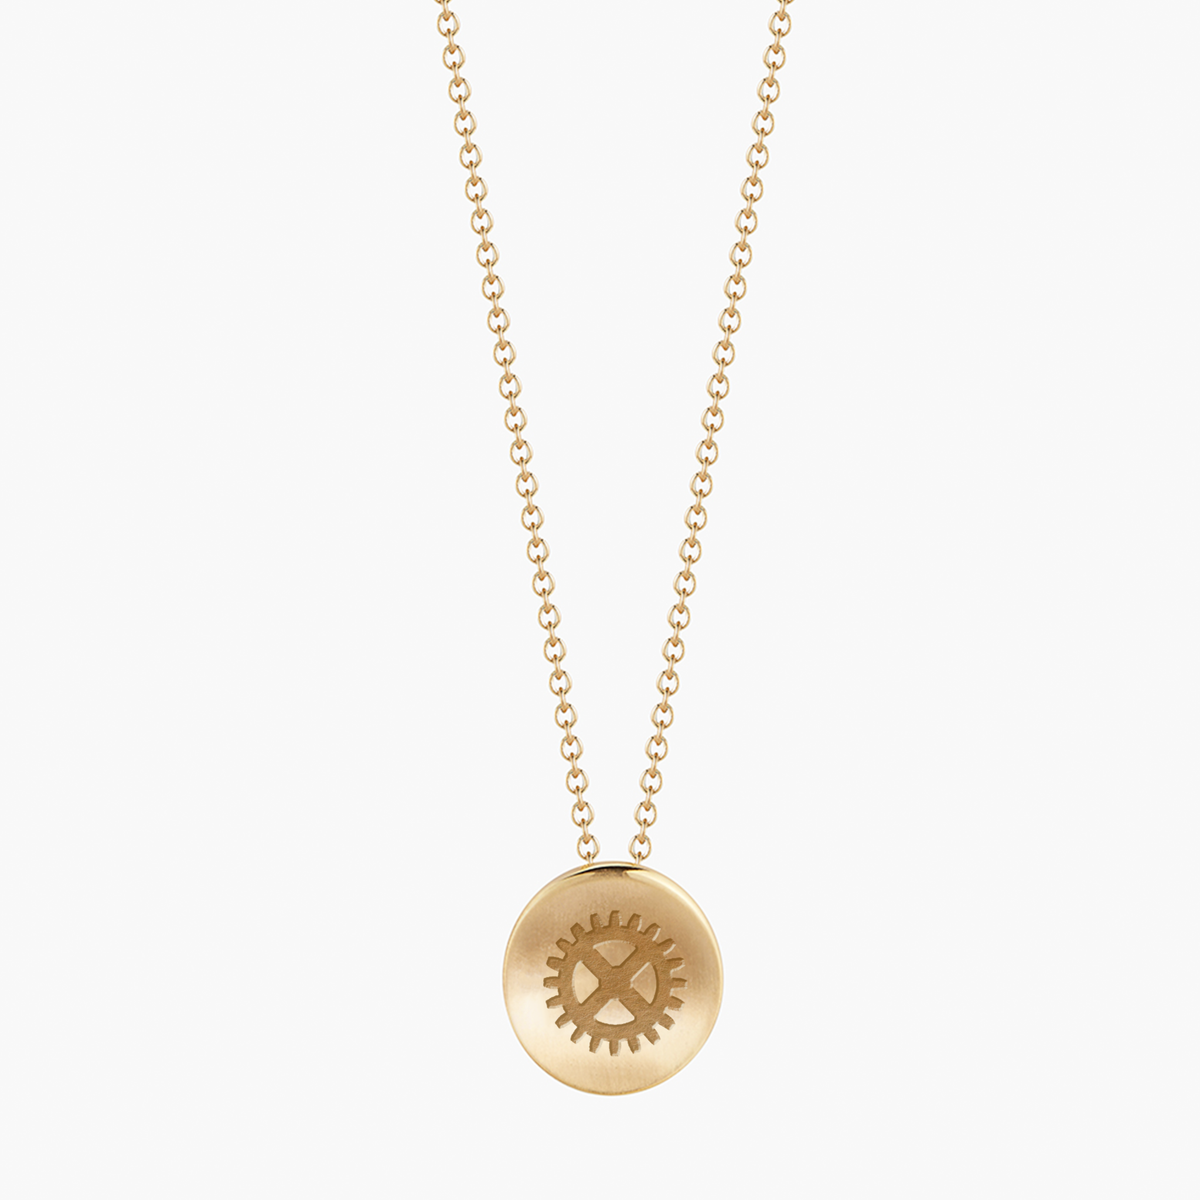 Theta Tau Gear Necklace Petite in Cavan Gold and 14K Gold